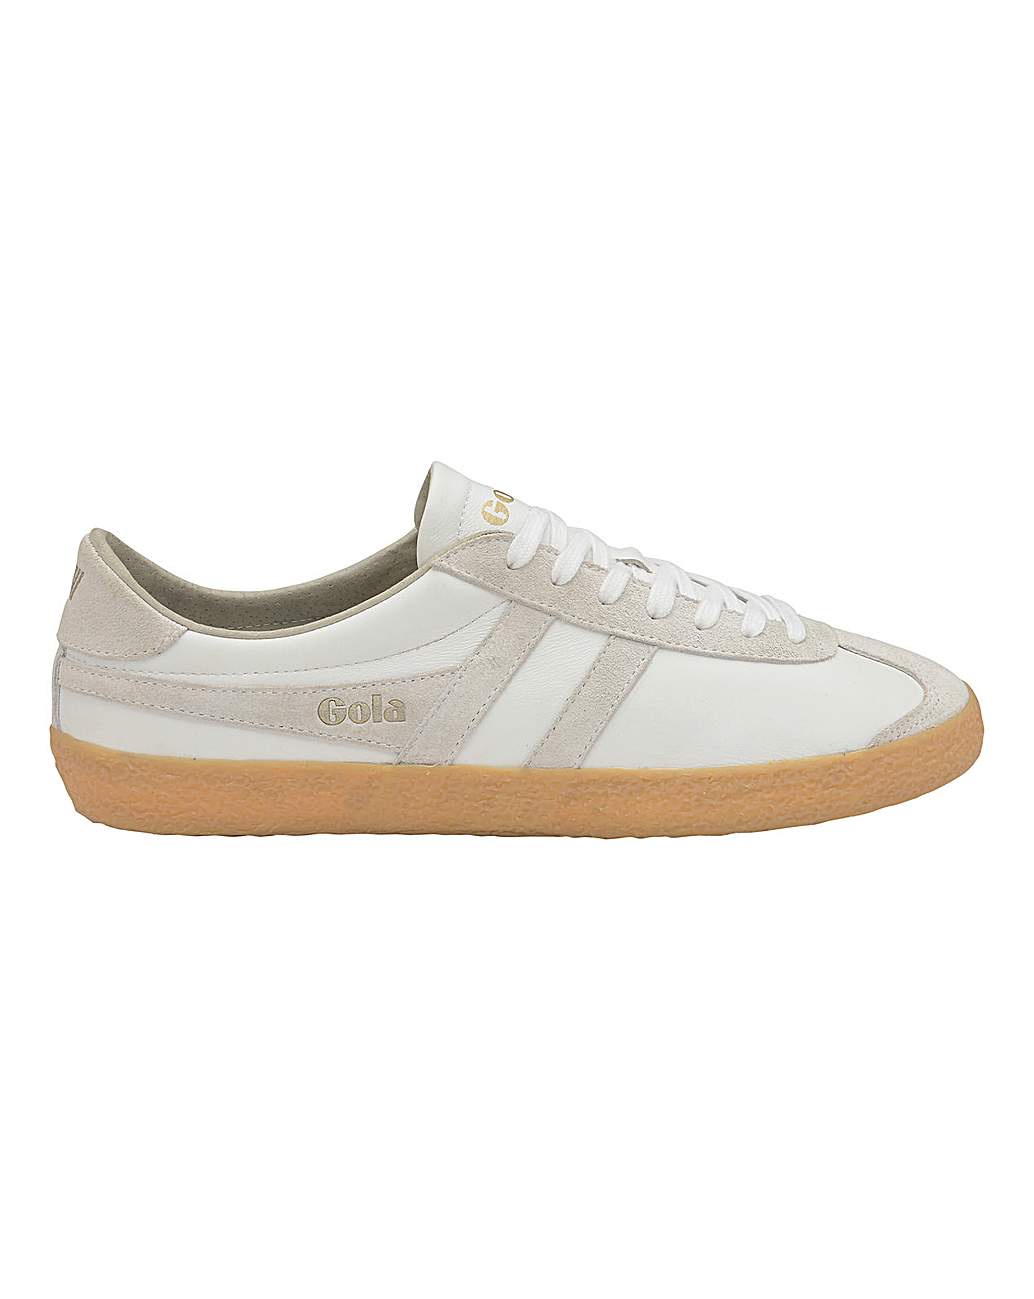 Gola Specialist Leather Trainers | Marisota